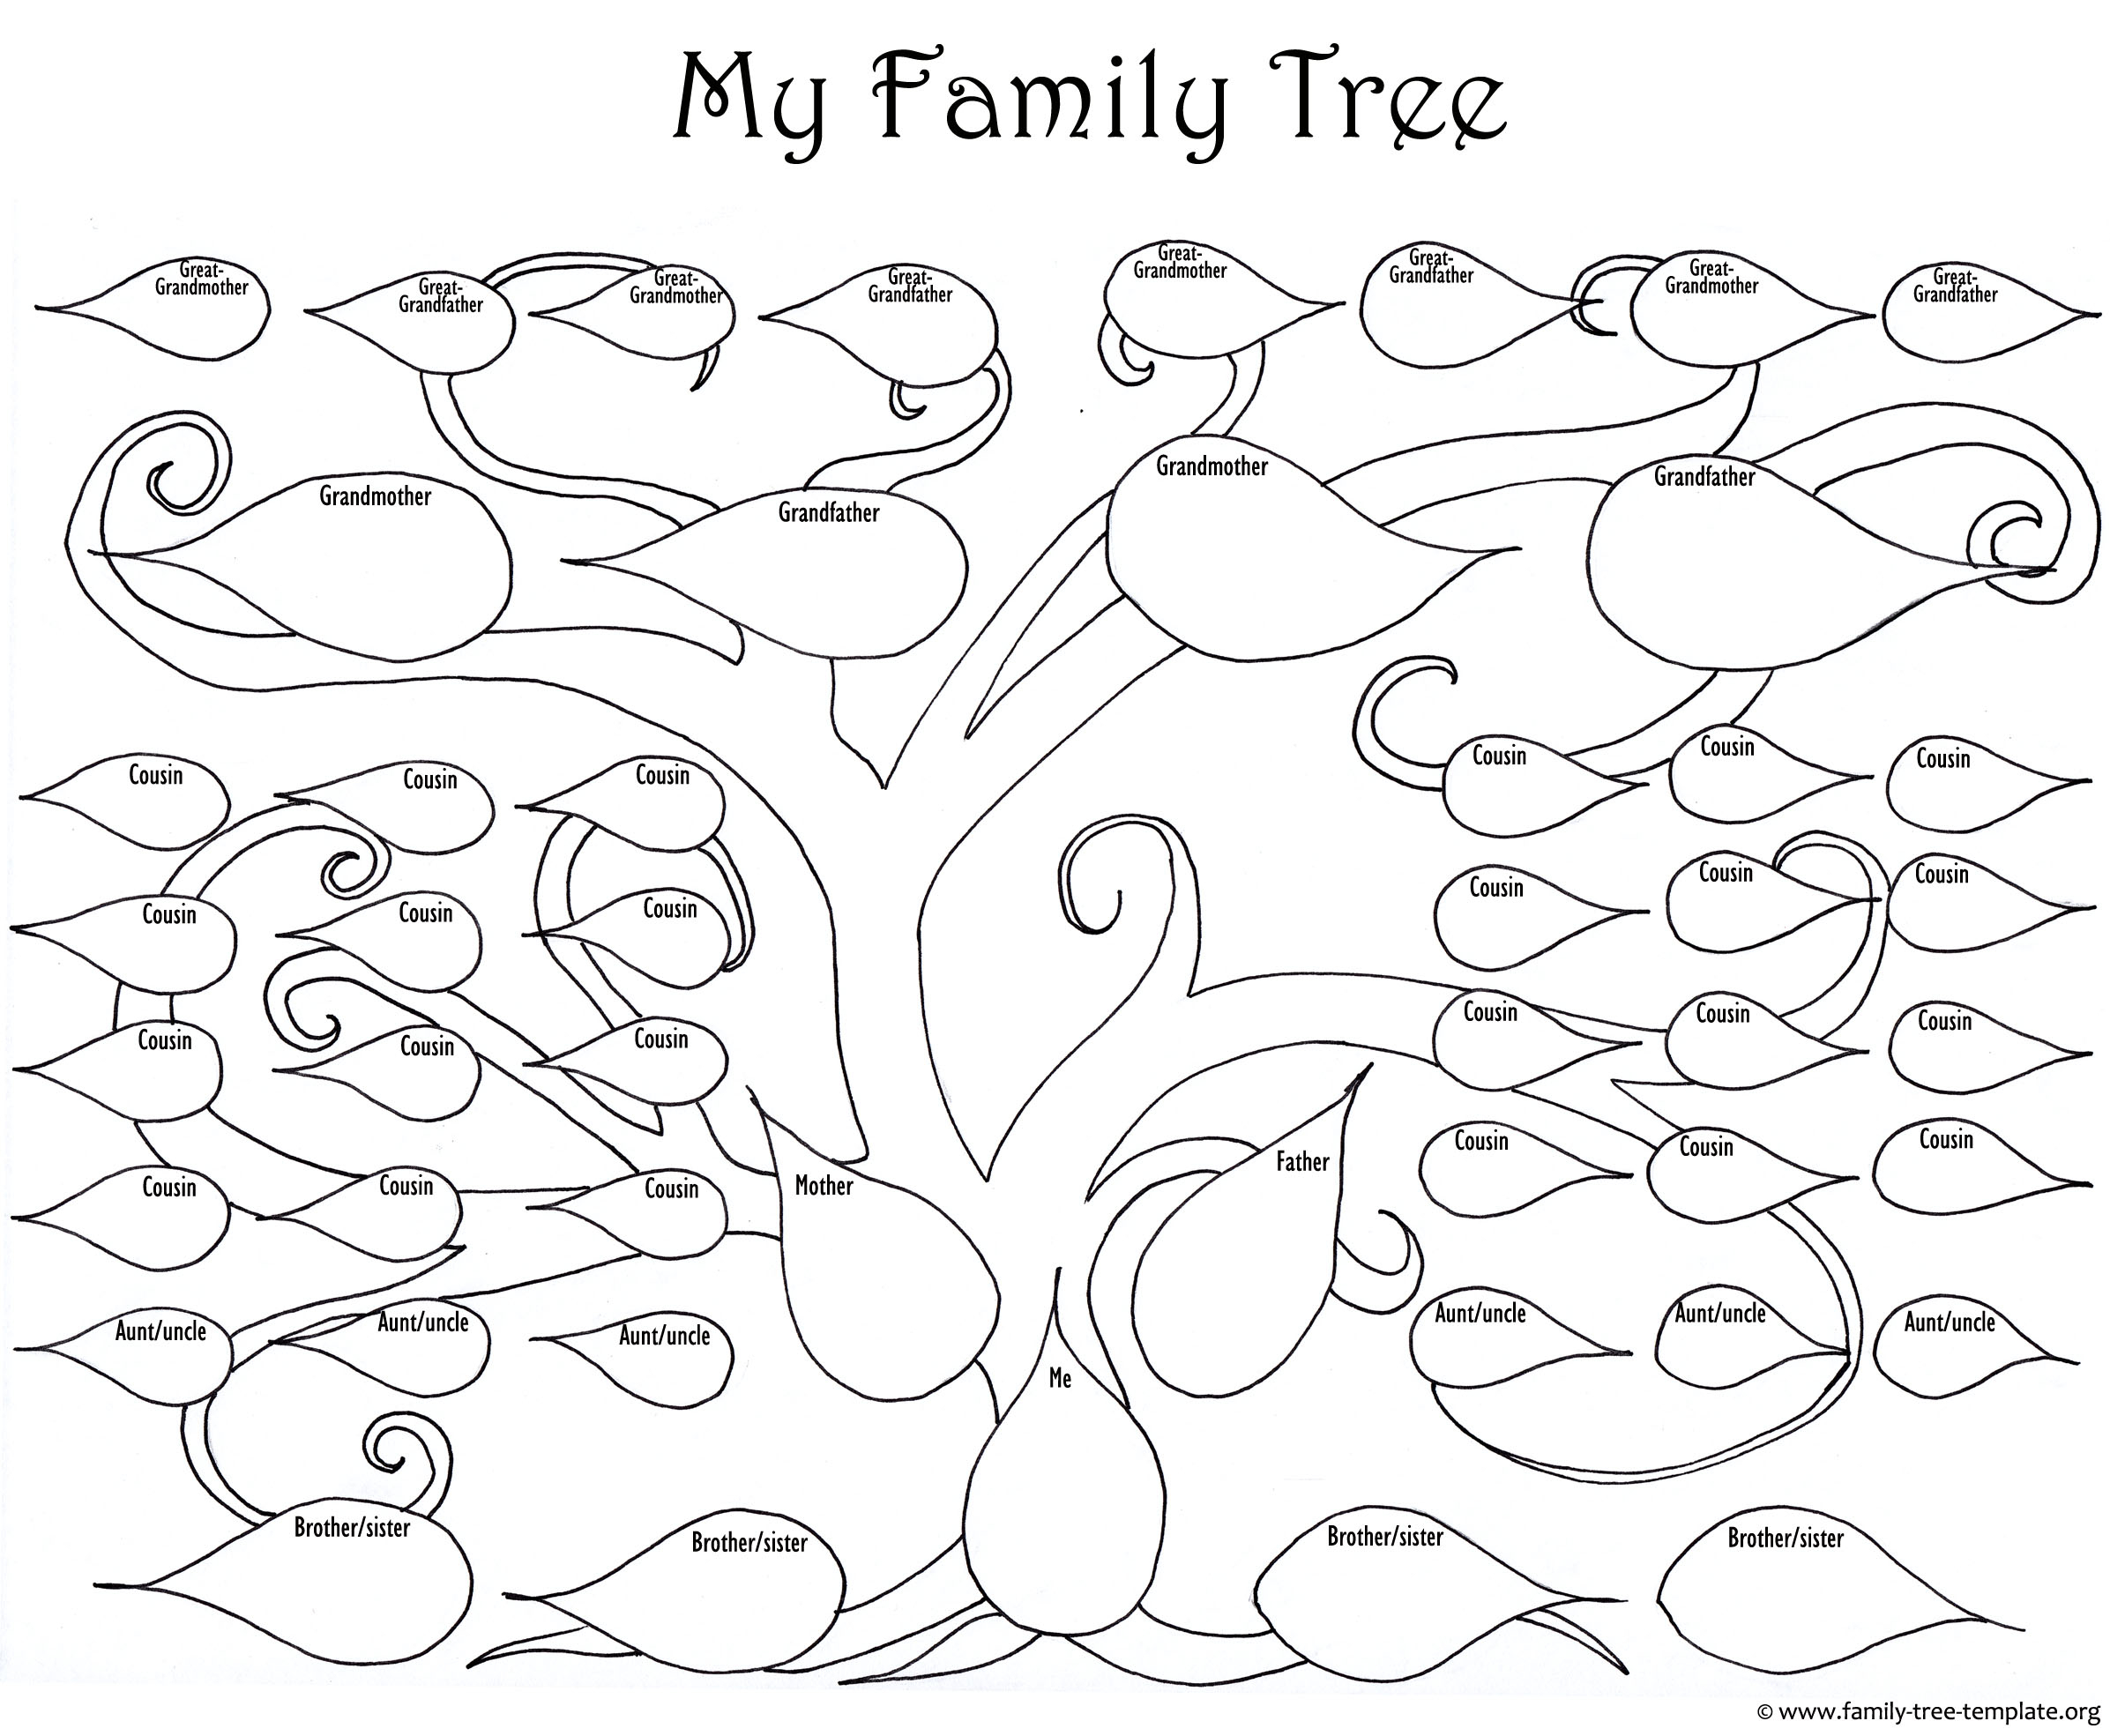 the-best-free-family-tree-drawing-images-download-from-22676-free